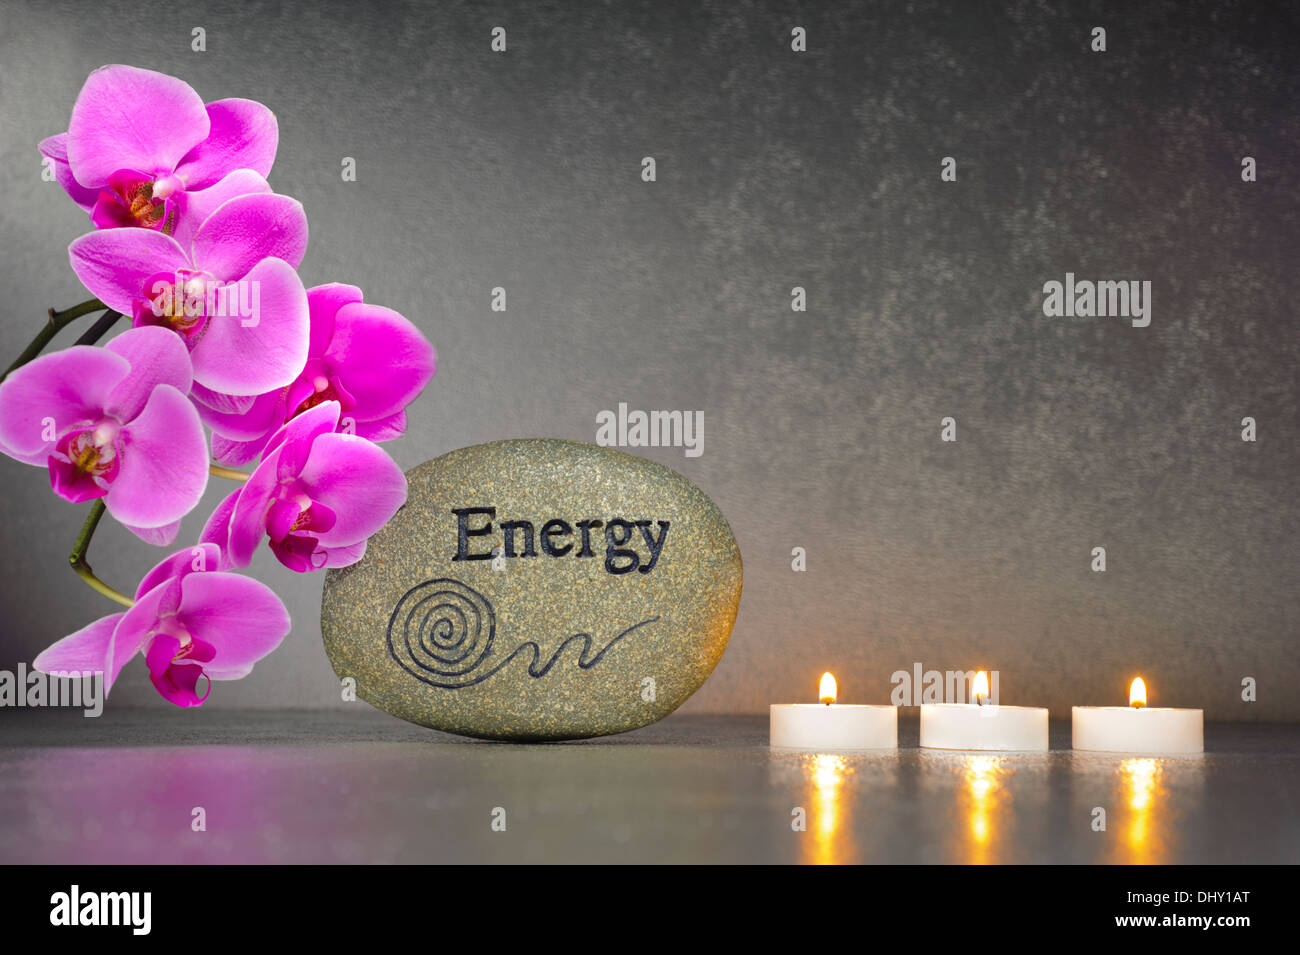 Japanese ZEN garden with stone of energy and candle lights in row with orchid flower Stock Photo